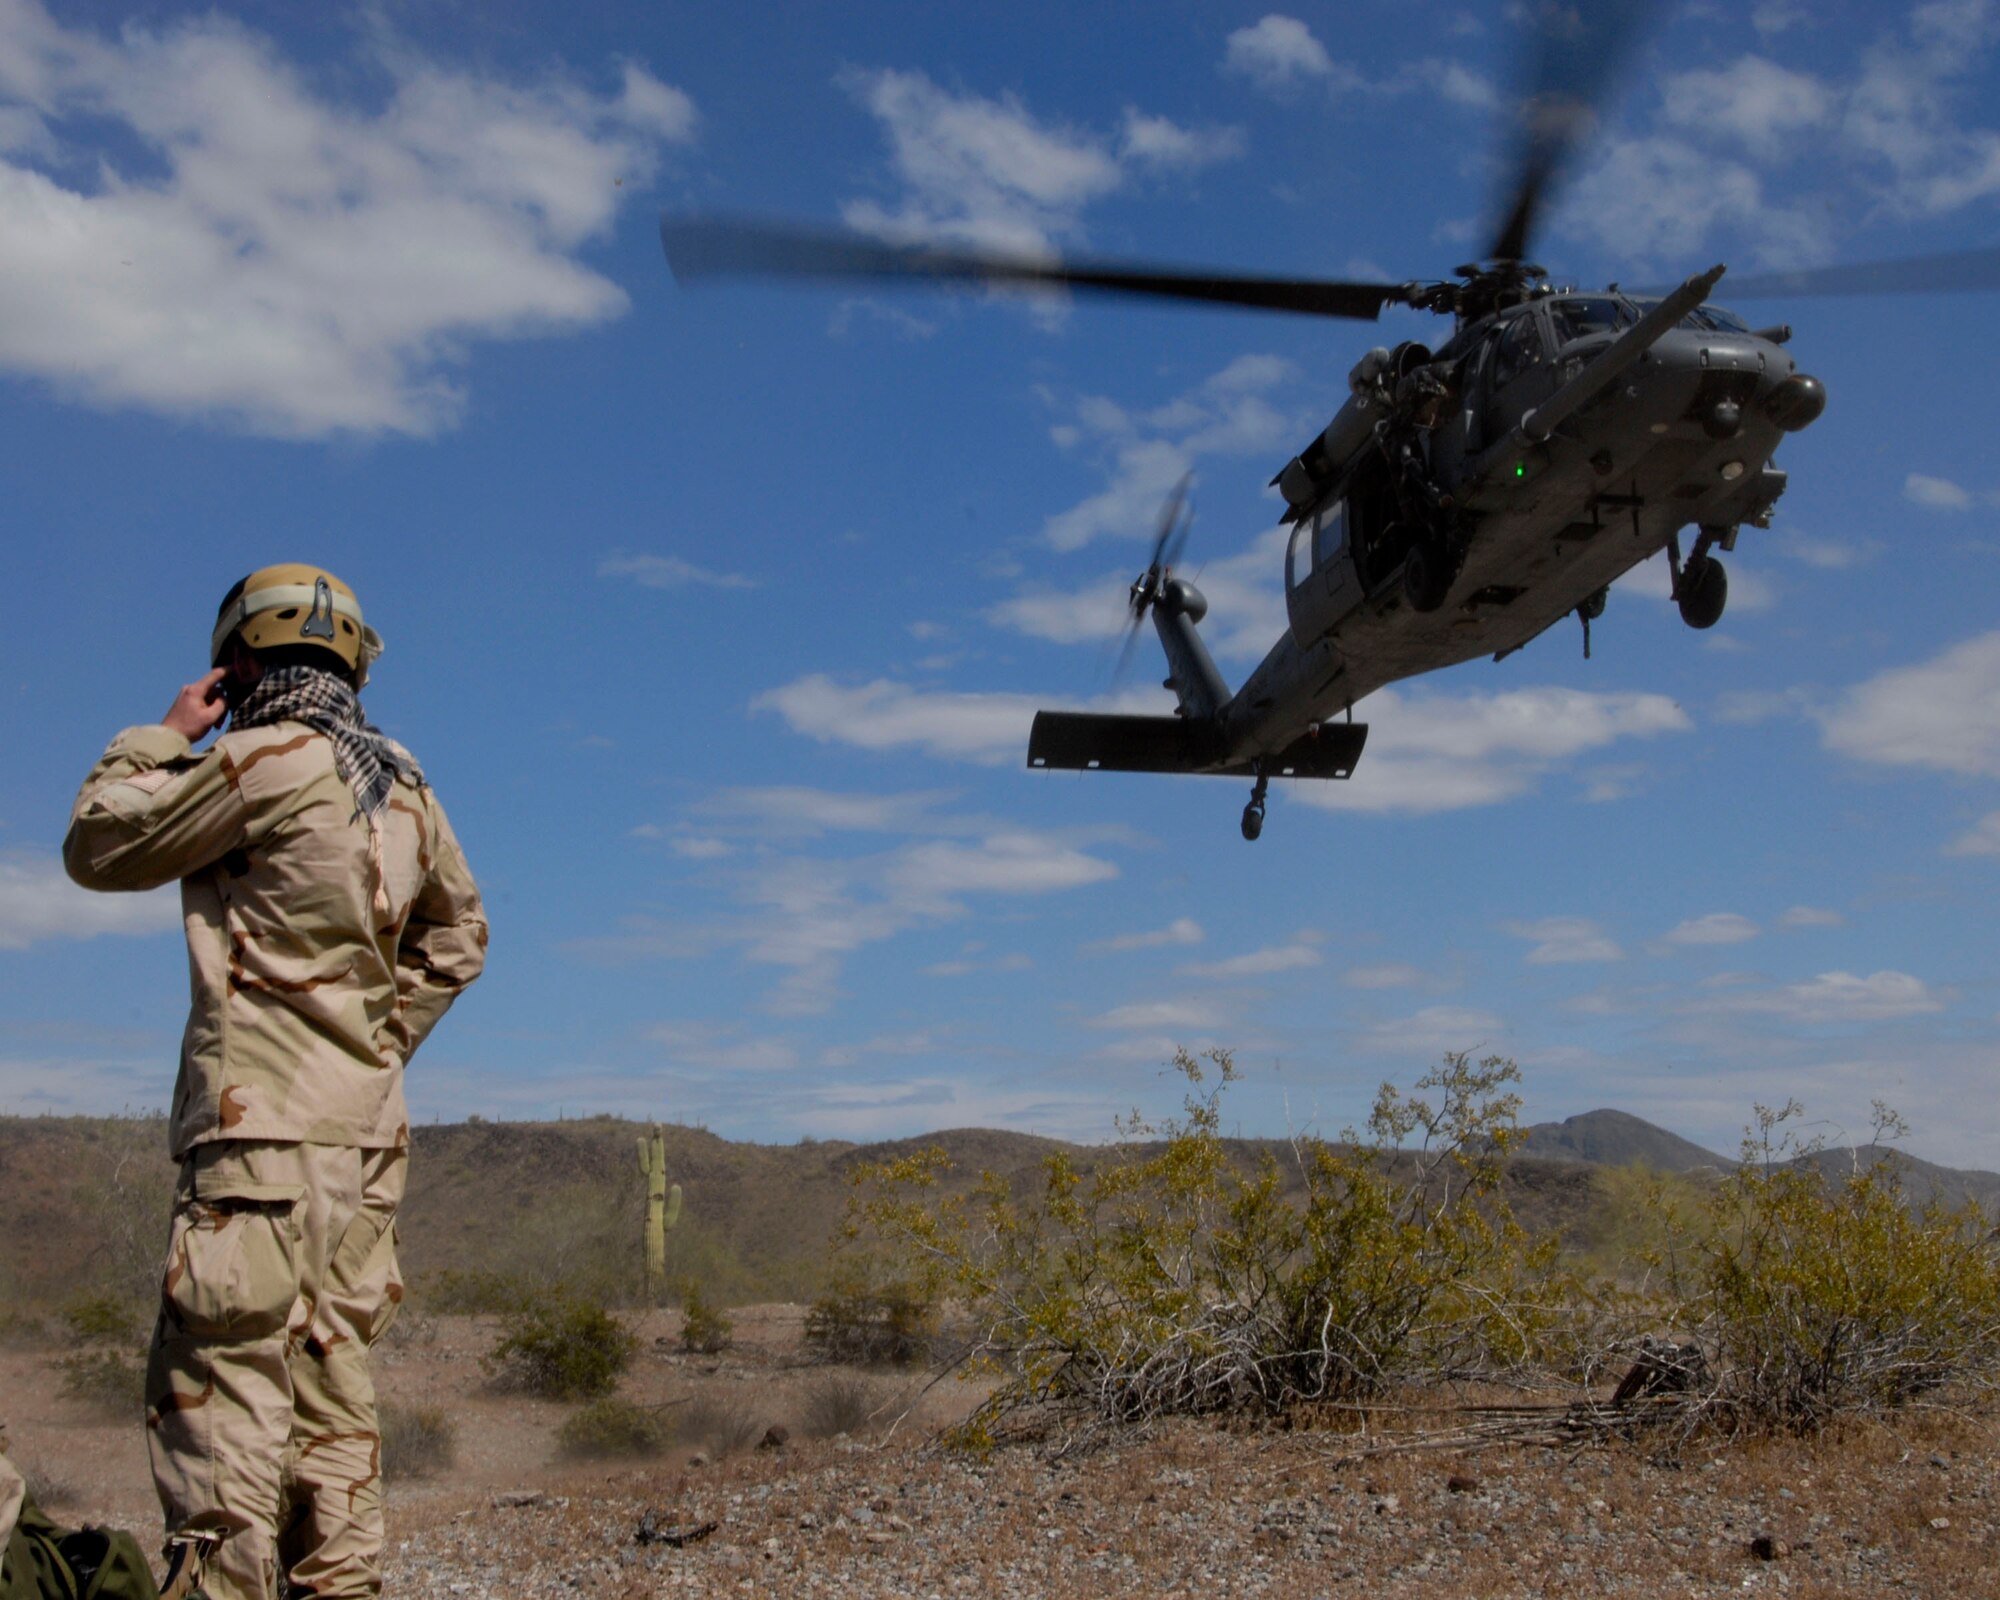 A U.S. Air Force HH-60G Pave Hawk rescue helicopter with the Alaska Air National Guard lands at the Barry M. Goldwater Range in the Sonoran Desert outside Davis-Monthan Air Force Base, Tucson, Ariz., April 19, 2010 during an Angel Thunder combat search and rescue exercise scenario. (U.S. Air National Guard photo/Airman 1st Class Jessica Green)